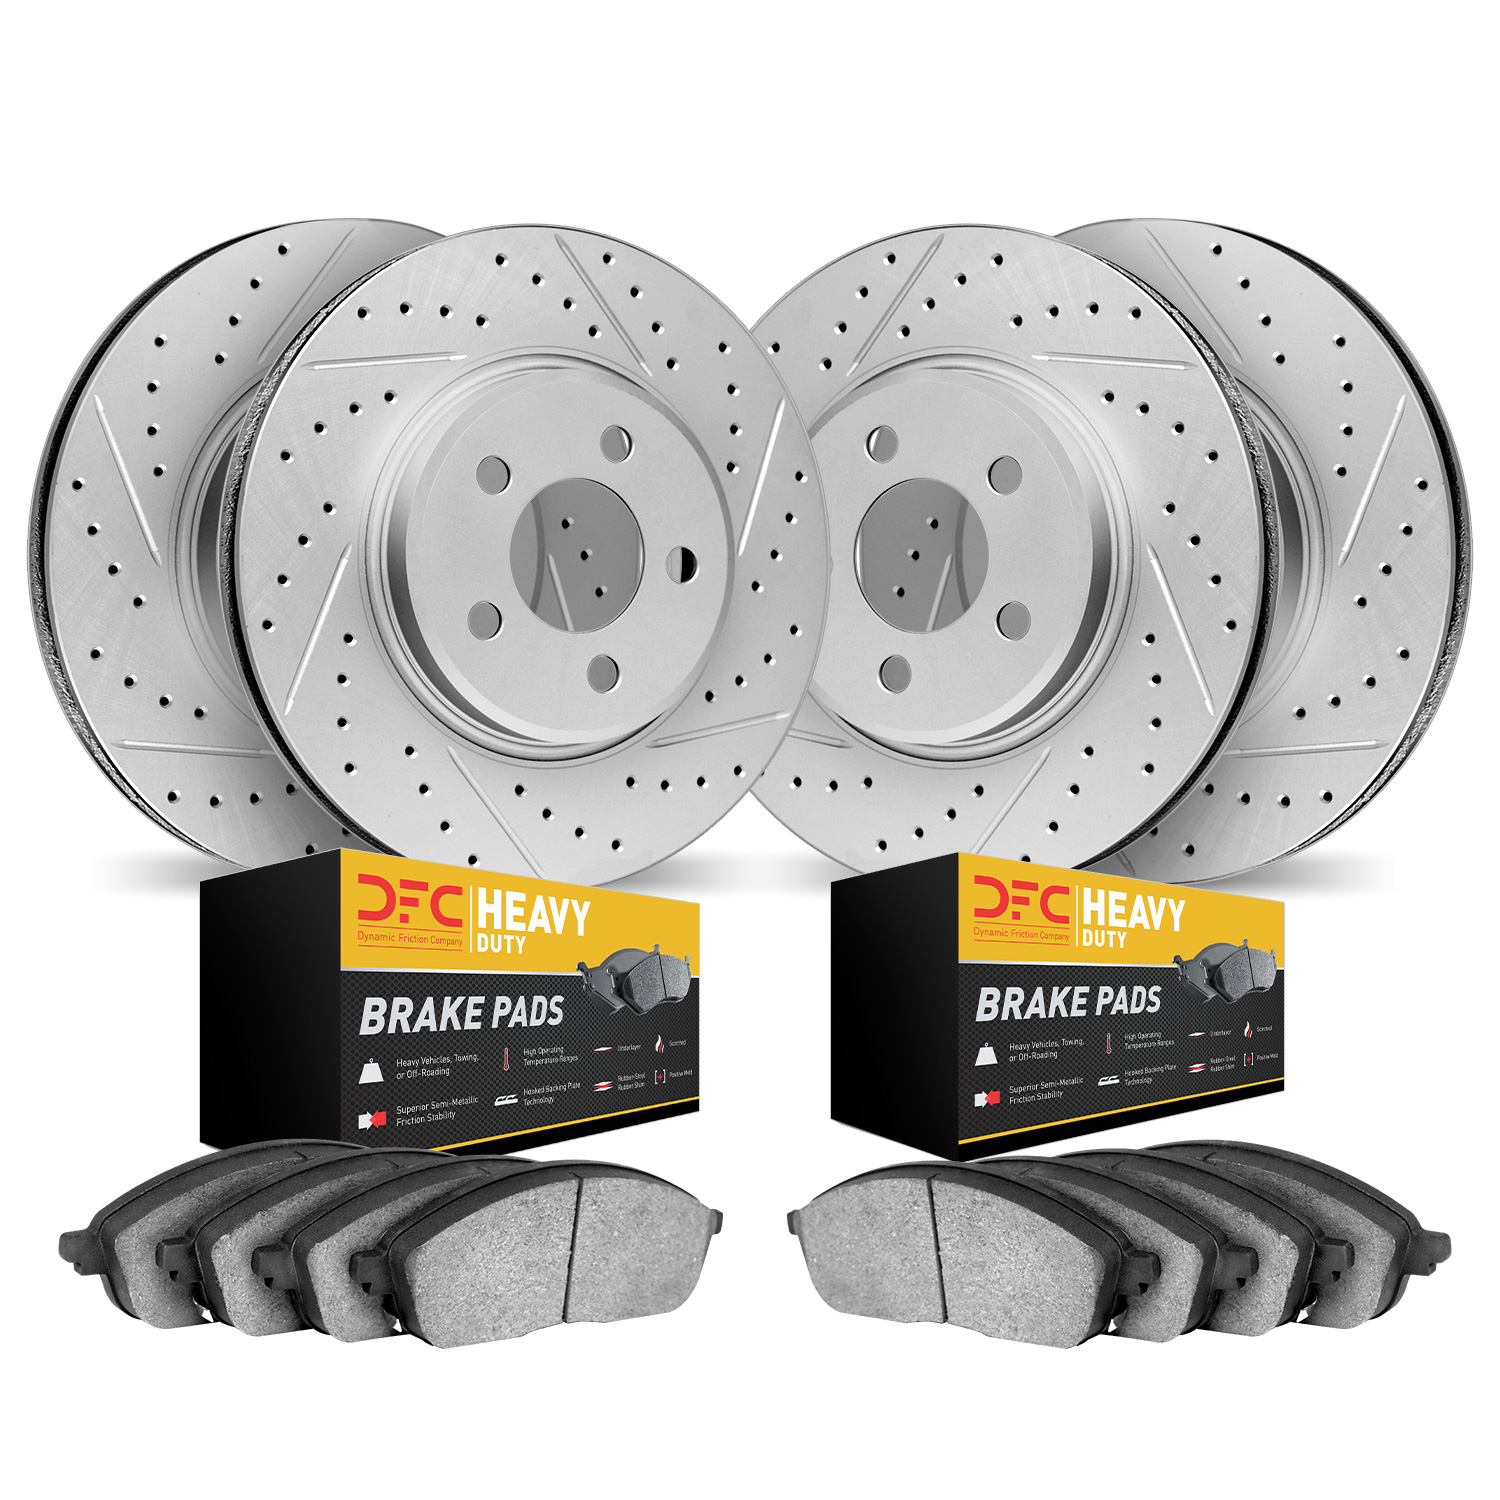 2204-56008 Geoperformance Drilled/Slotted Rotors w/Heavy-Duty Pads Kit, 2003-2011 Ford/Lincoln/Mercury/Mazda, Position: Front an